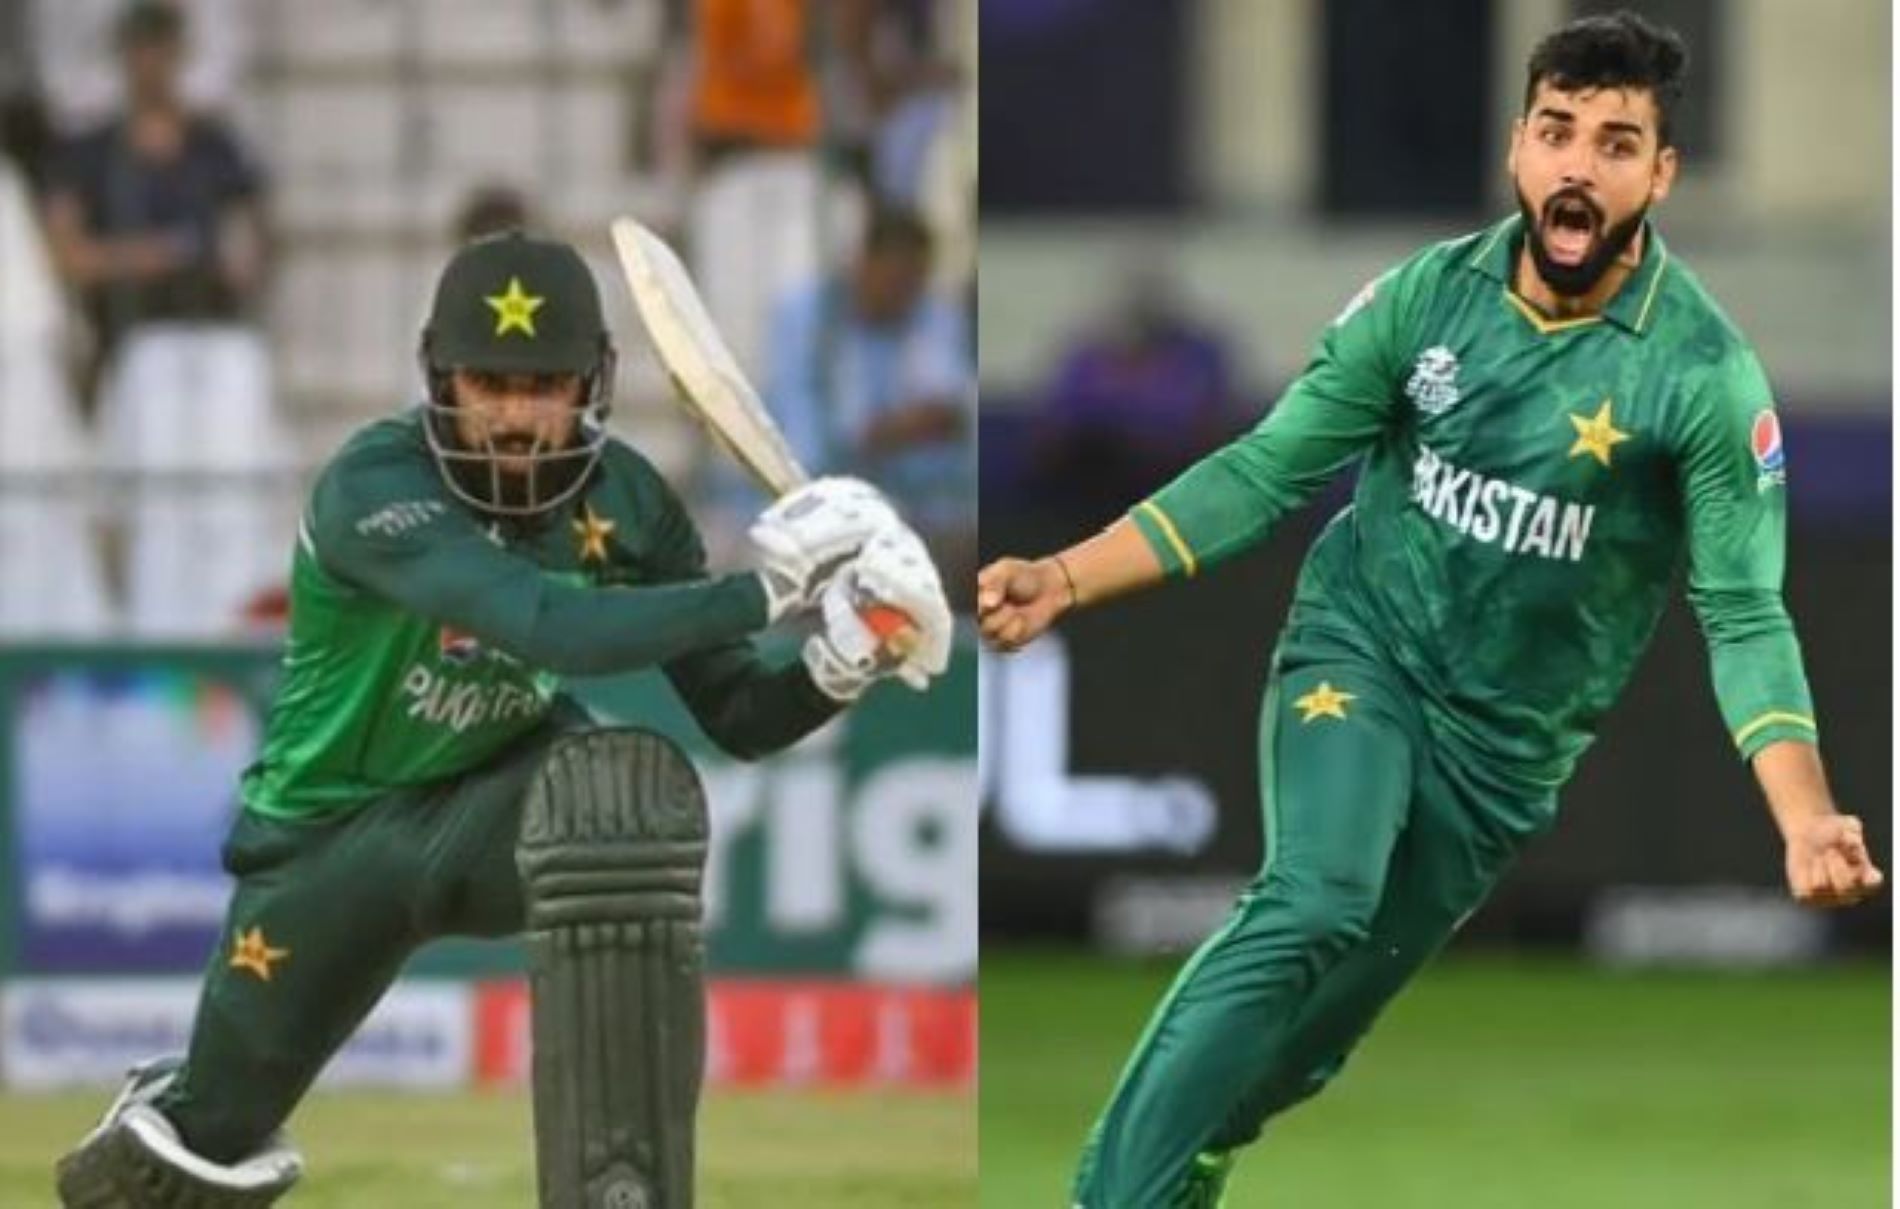 Shadab Khan has been in red-hot form in white-ball cricket for Pakistan.